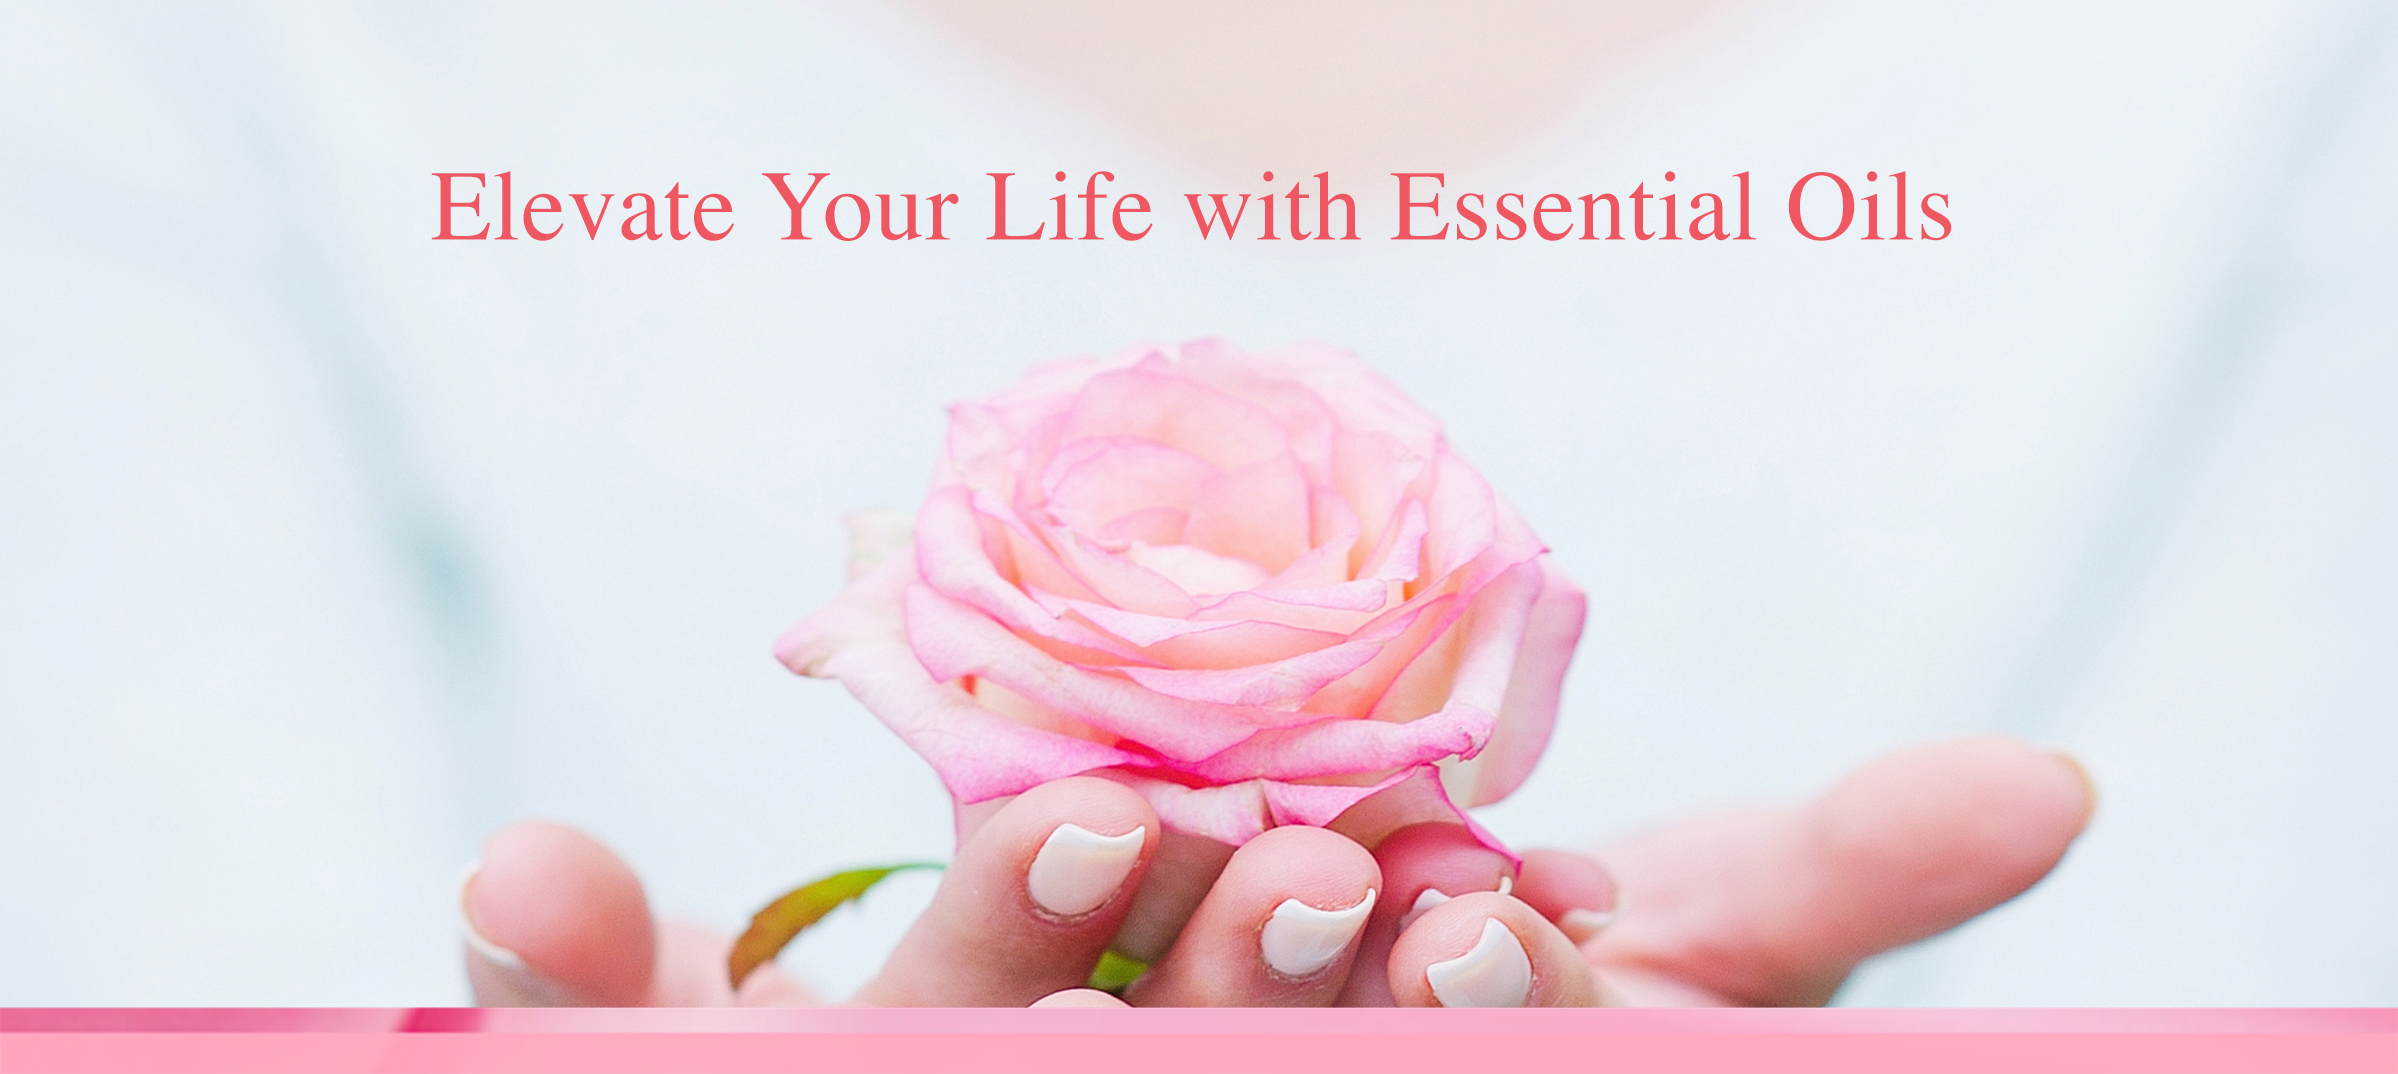 Elevate your Life with Essential Oils